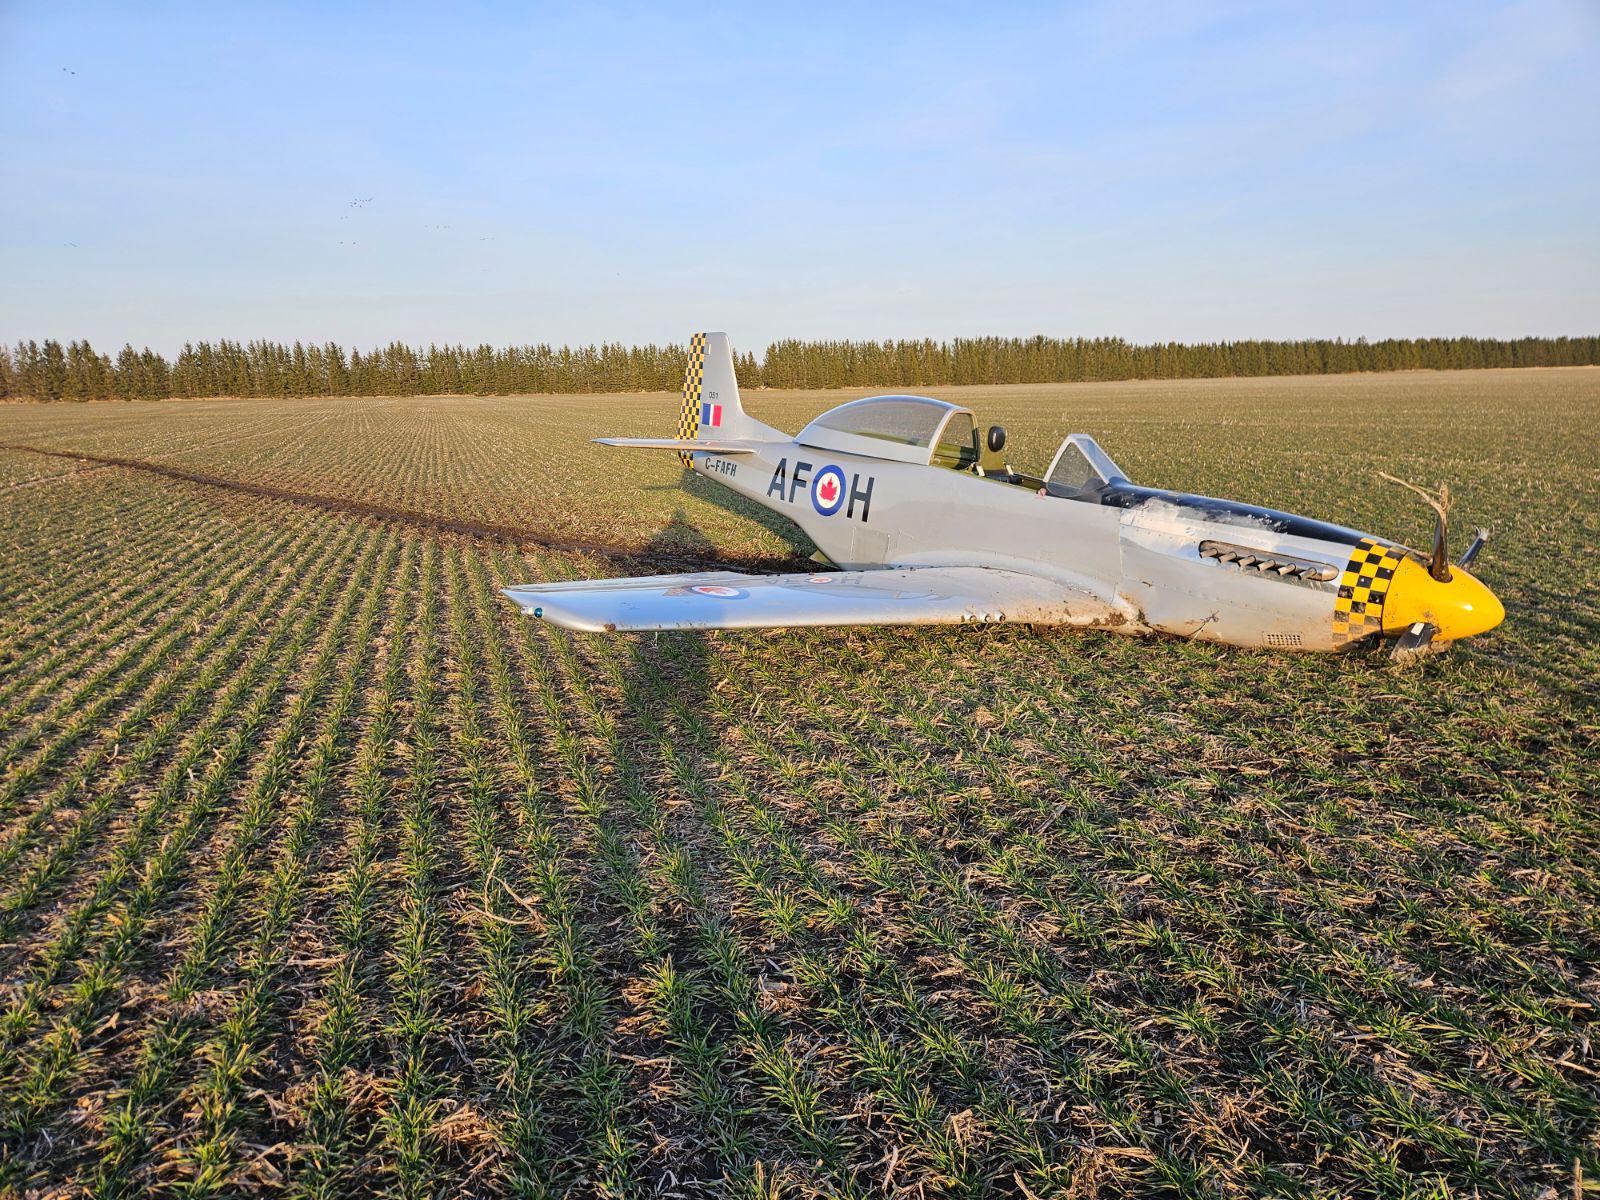 Plane crashes into field near Barrie, Ont., pilot escapes injury